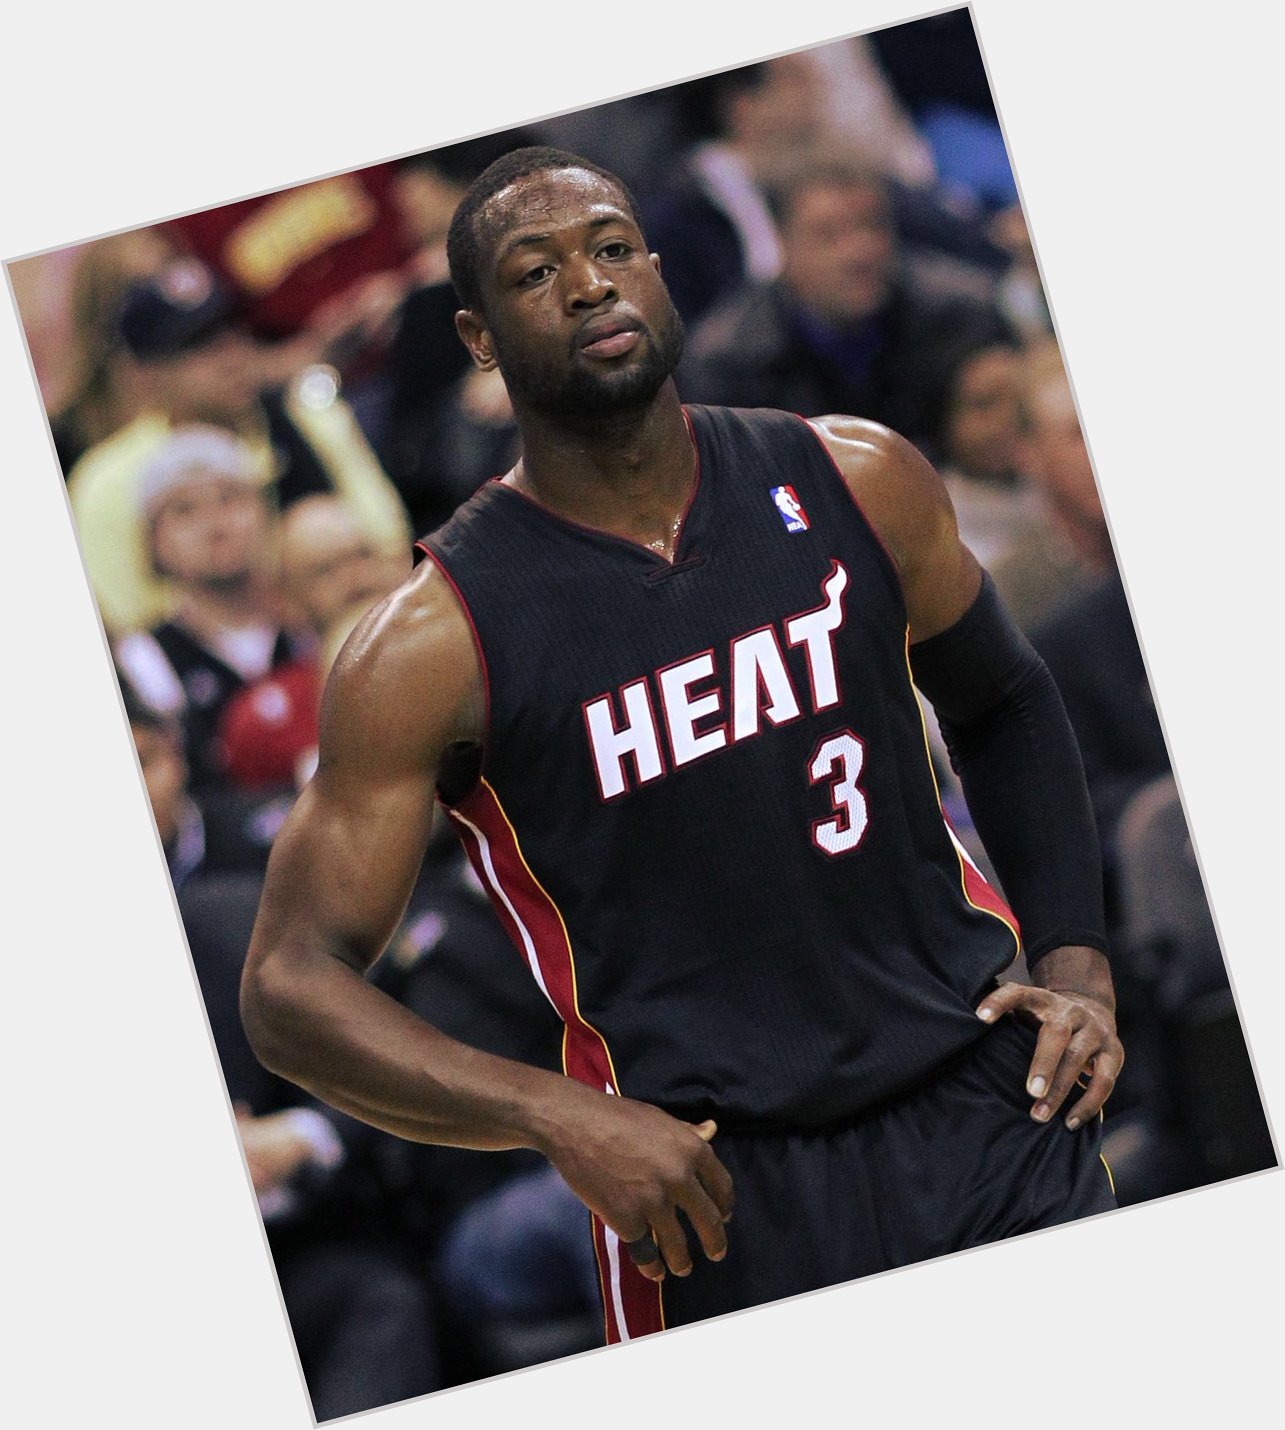 HAPPY BIRTHDAY TO MY FAVORITE PLAYER OF ALL TIME THE GREAT DWYANE WADE 